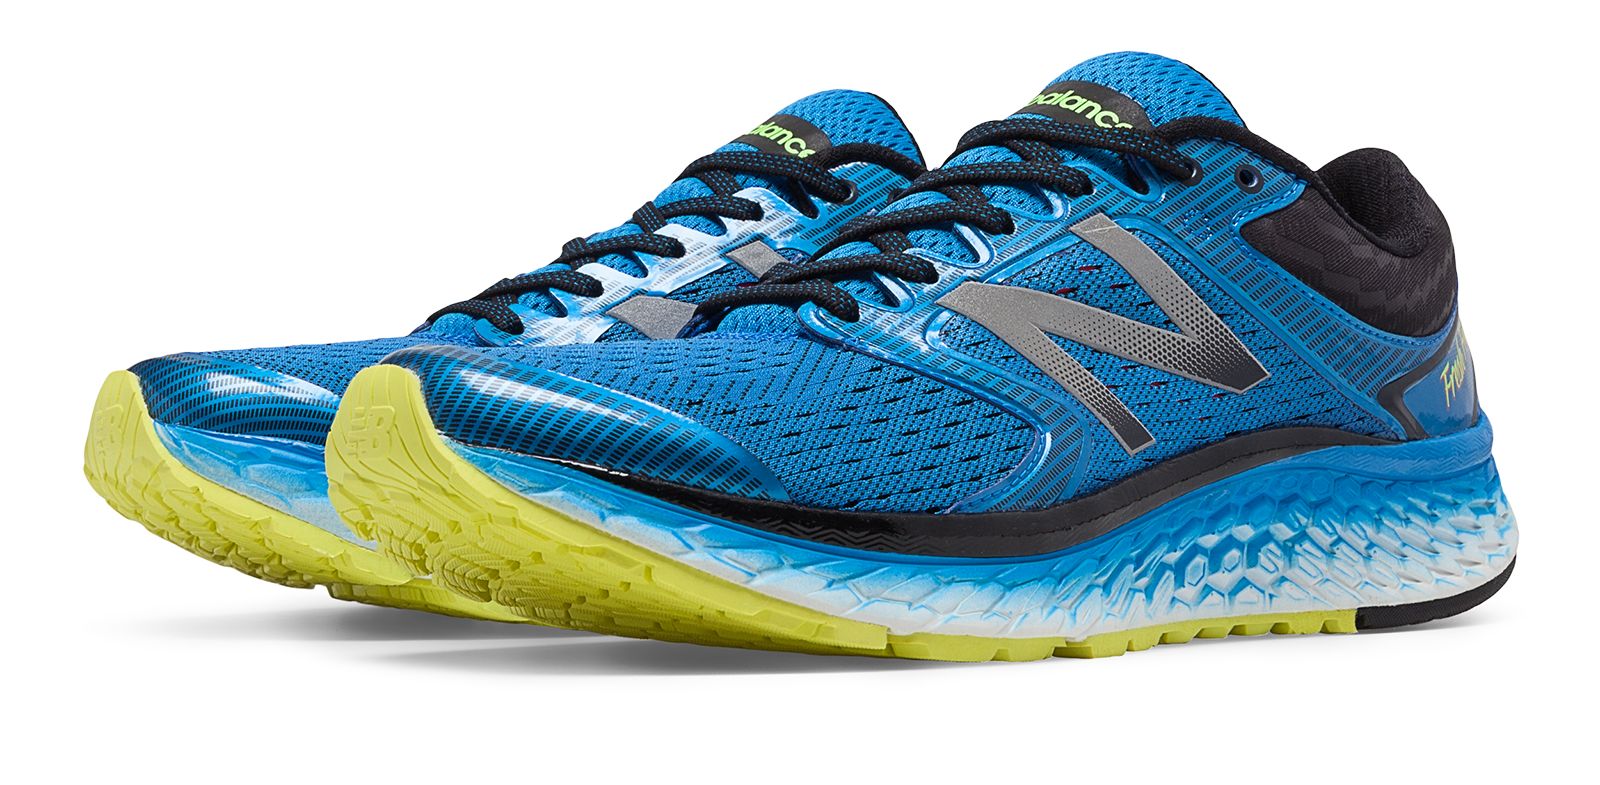 New Balance M1080-V7 on Sale - Discounts Up to 49% Off on M1080BY7 at Joe's  New Balance Outlet